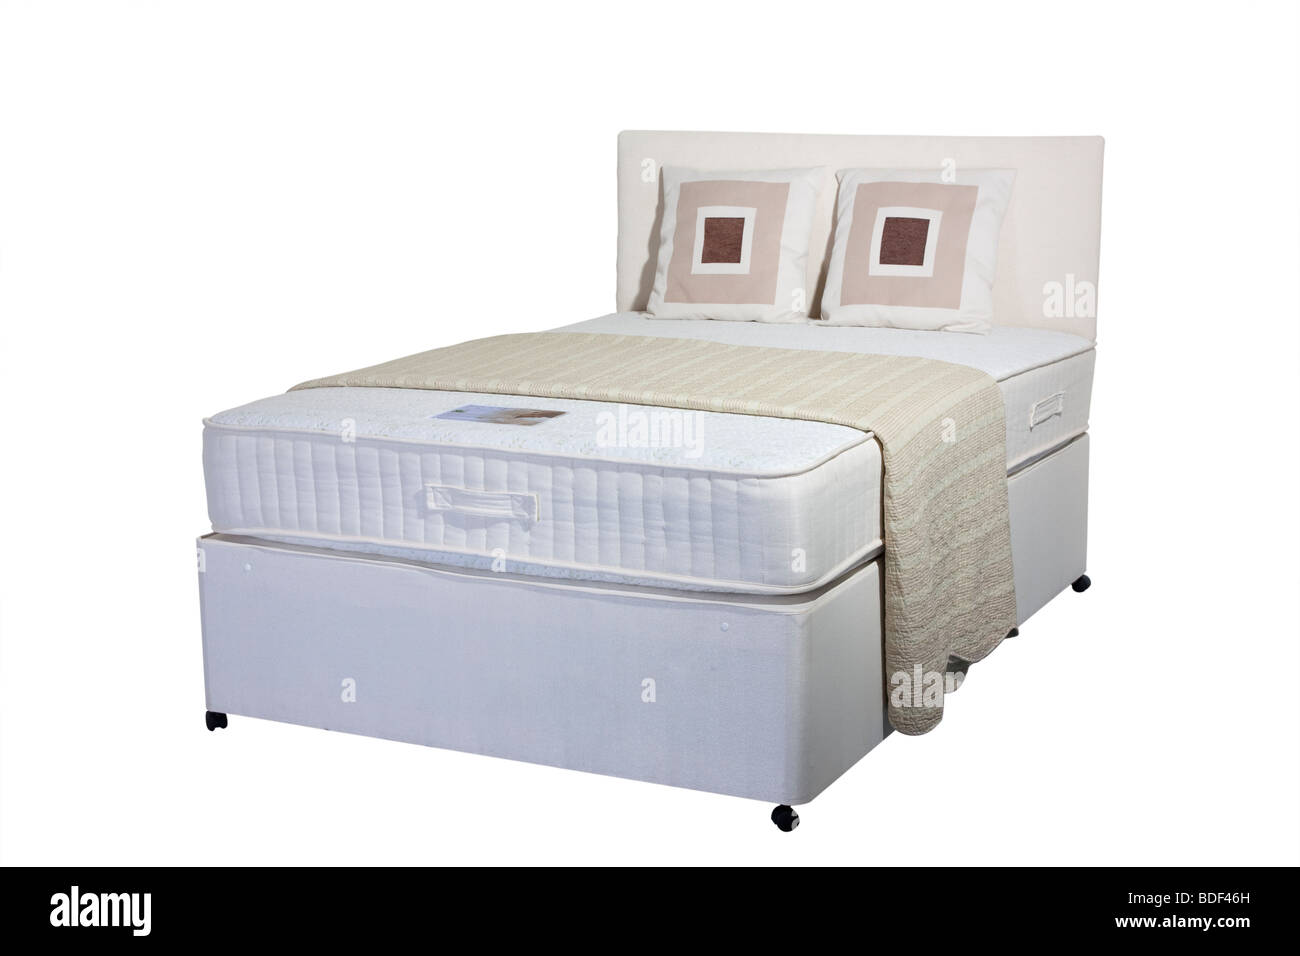 Studio shot cut out of double divan mattress and base with head board Stock Photo